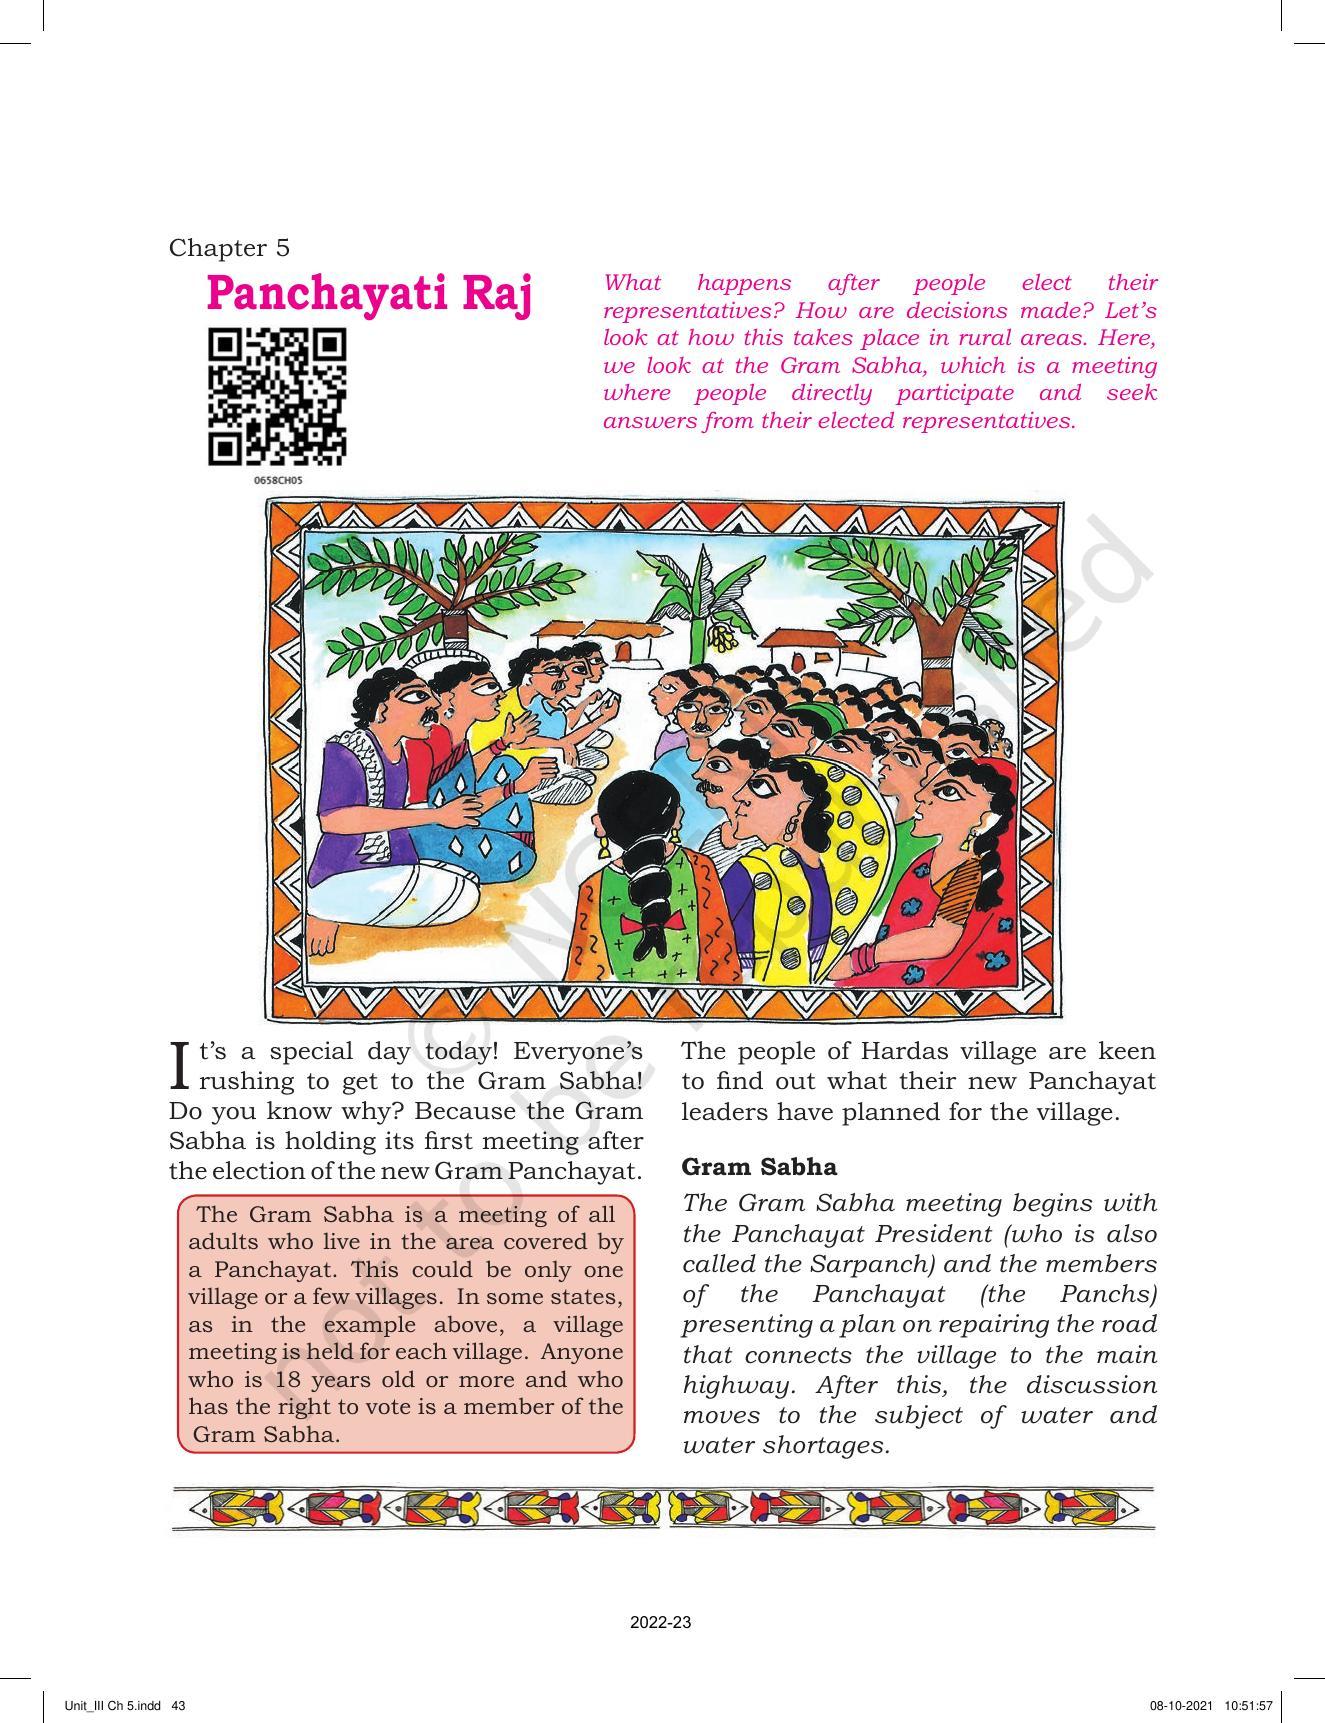 NCERT Book for Class 6 Social Science(Political Science) : Chapter 5-Panchayati Raj - Page 3